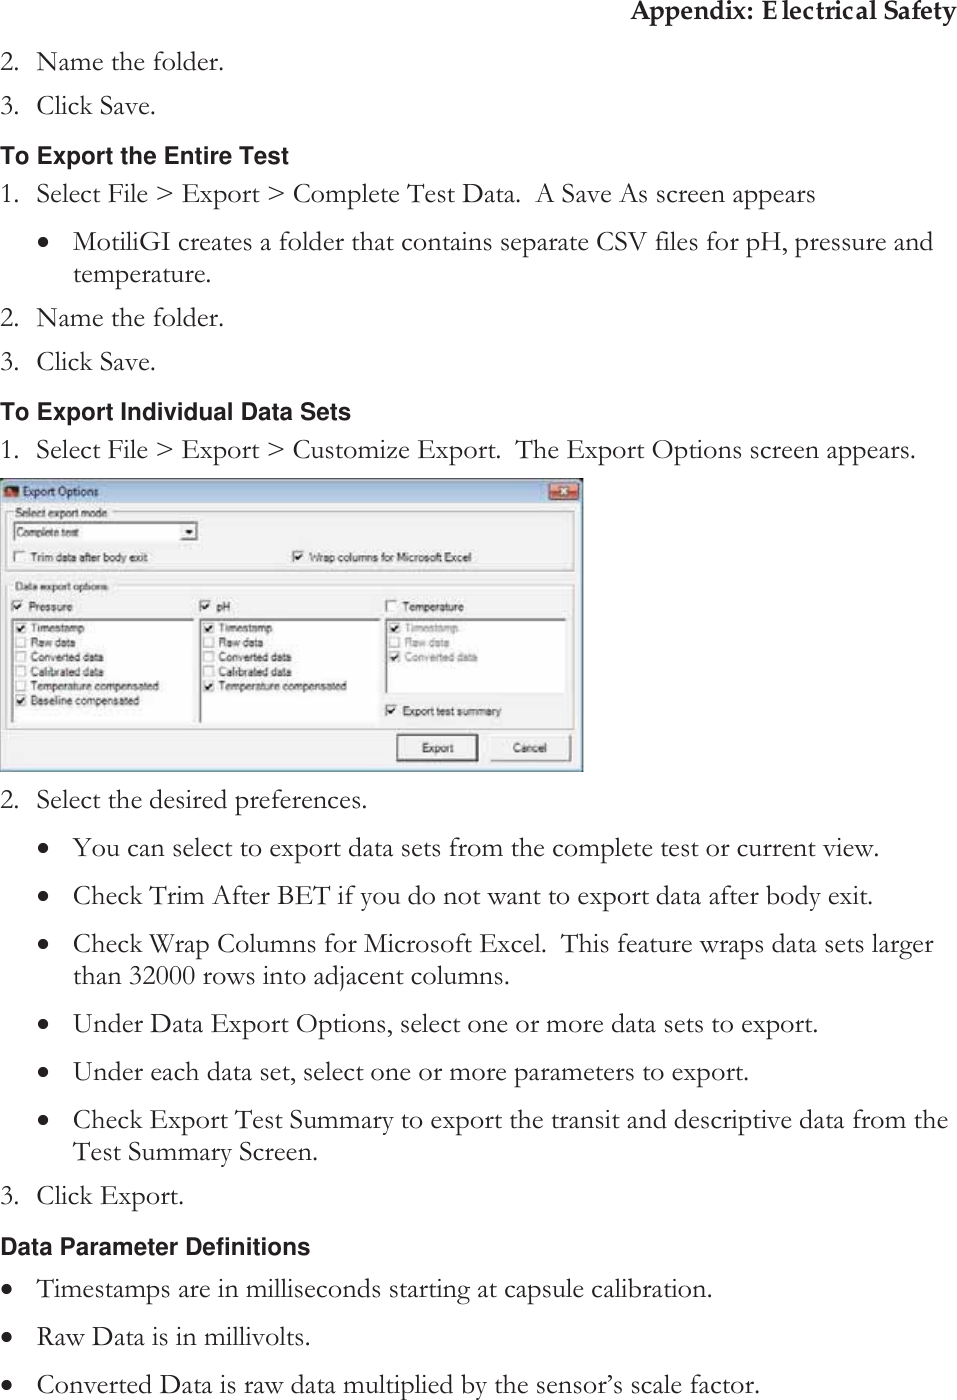 Appendix: Electrical Safety 2. Name the folder. 3. Click Save. To Export the Entire Test 1. Select File &gt; Export &gt; Complete Test Data.  A Save As screen appears xMotiliGI creates a folder that contains separate CSV files for pH, pressure and temperature. 2. Name the folder. 3. Click Save. To Export Individual Data Sets 1. Select File &gt; Export &gt; Customize Export.  The Export Options screen appears.  2. Select the desired preferences. xYou can select to export data sets from the complete test or current view. xCheck Trim After BET if you do not want to export data after body exit. xCheck Wrap Columns for Microsoft Excel.  This feature wraps data sets larger than 32000 rows into adjacent columns. xUnder Data Export Options, select one or more data sets to export. xUnder each data set, select one or more parameters to export. xCheck Export Test Summary to export the transit and descriptive data from the Test Summary Screen. 3. Click Export. Data Parameter Definitions xTimestamps are in milliseconds starting at capsule calibration. xRaw Data is in millivolts. xConverted Data is raw data multiplied by the sensor’s scale factor.   